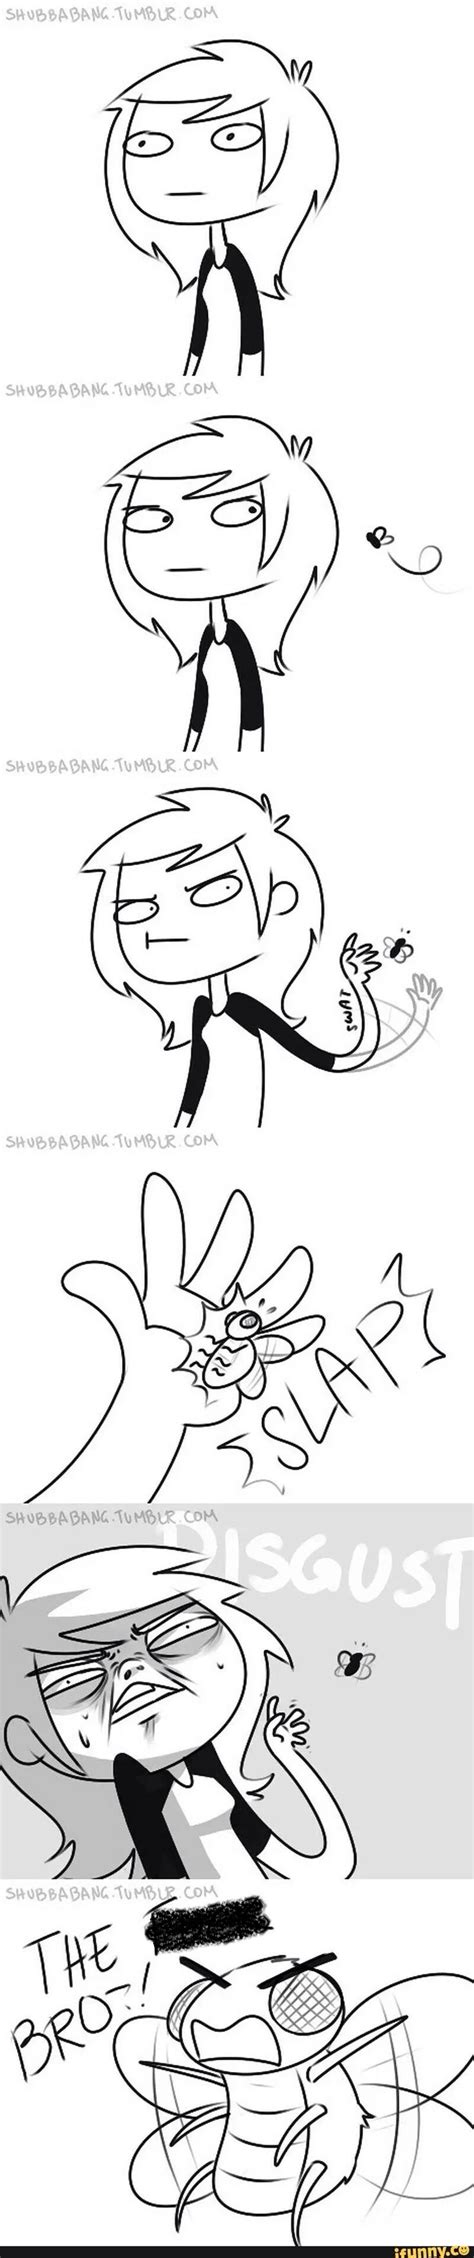 yep swat at bug then freak out when you actually make contact with it funny comics tumblr